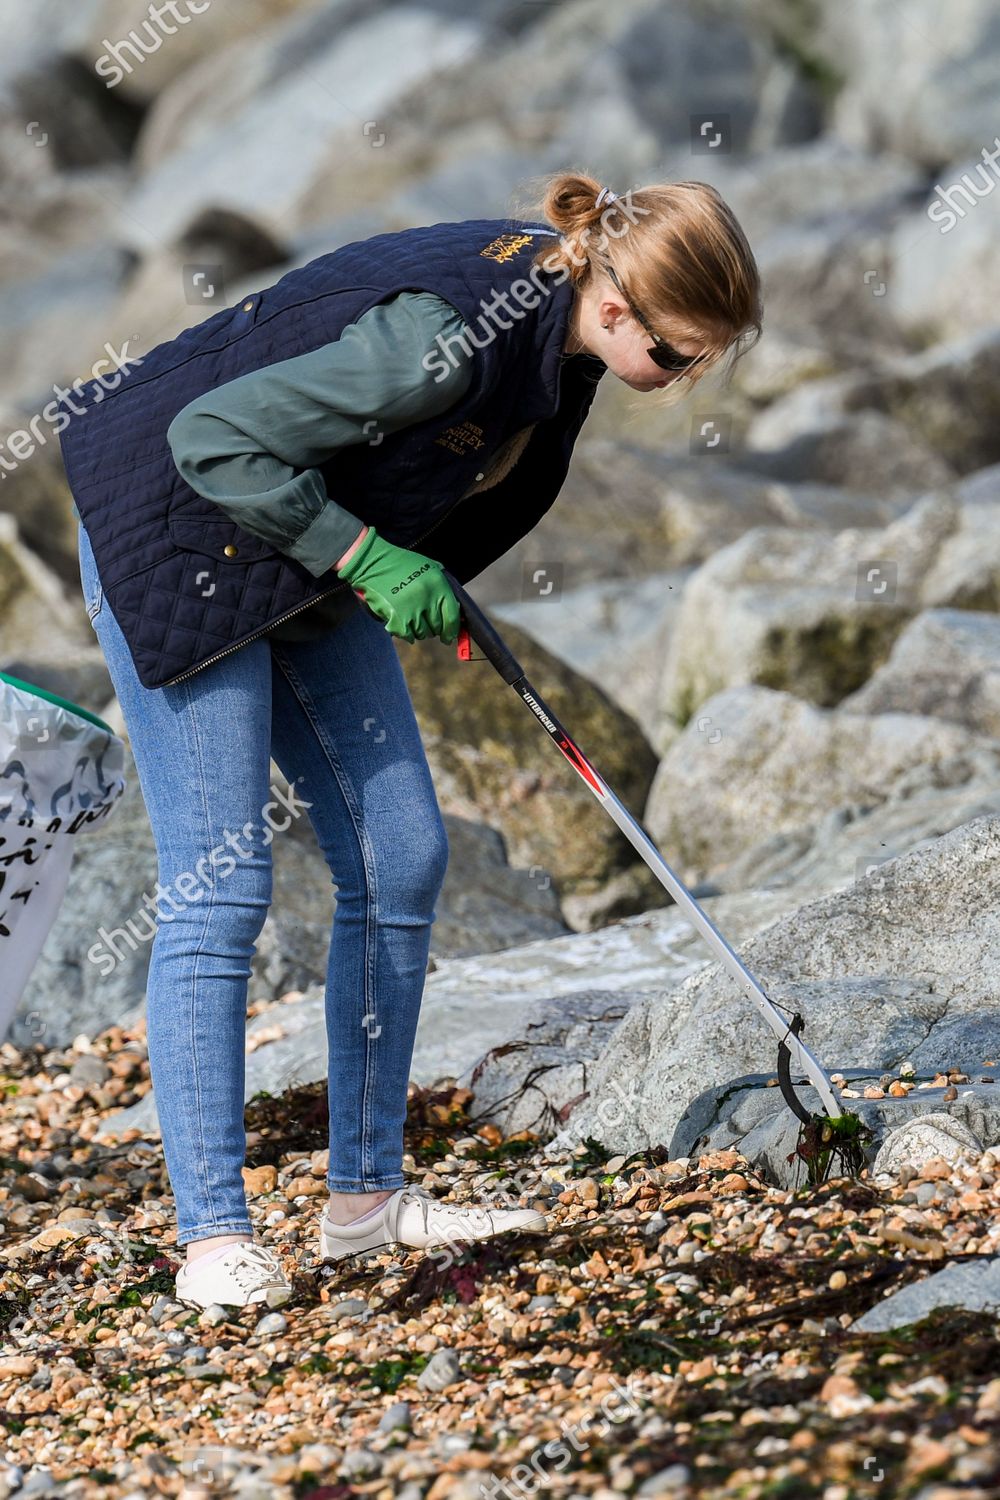 prince-edward-and-sophie-countess-of-wessex-great-british-beach-clean-southsea-beach-portsmouth-uk-shutterstock-editorial-10782998bv.jpg